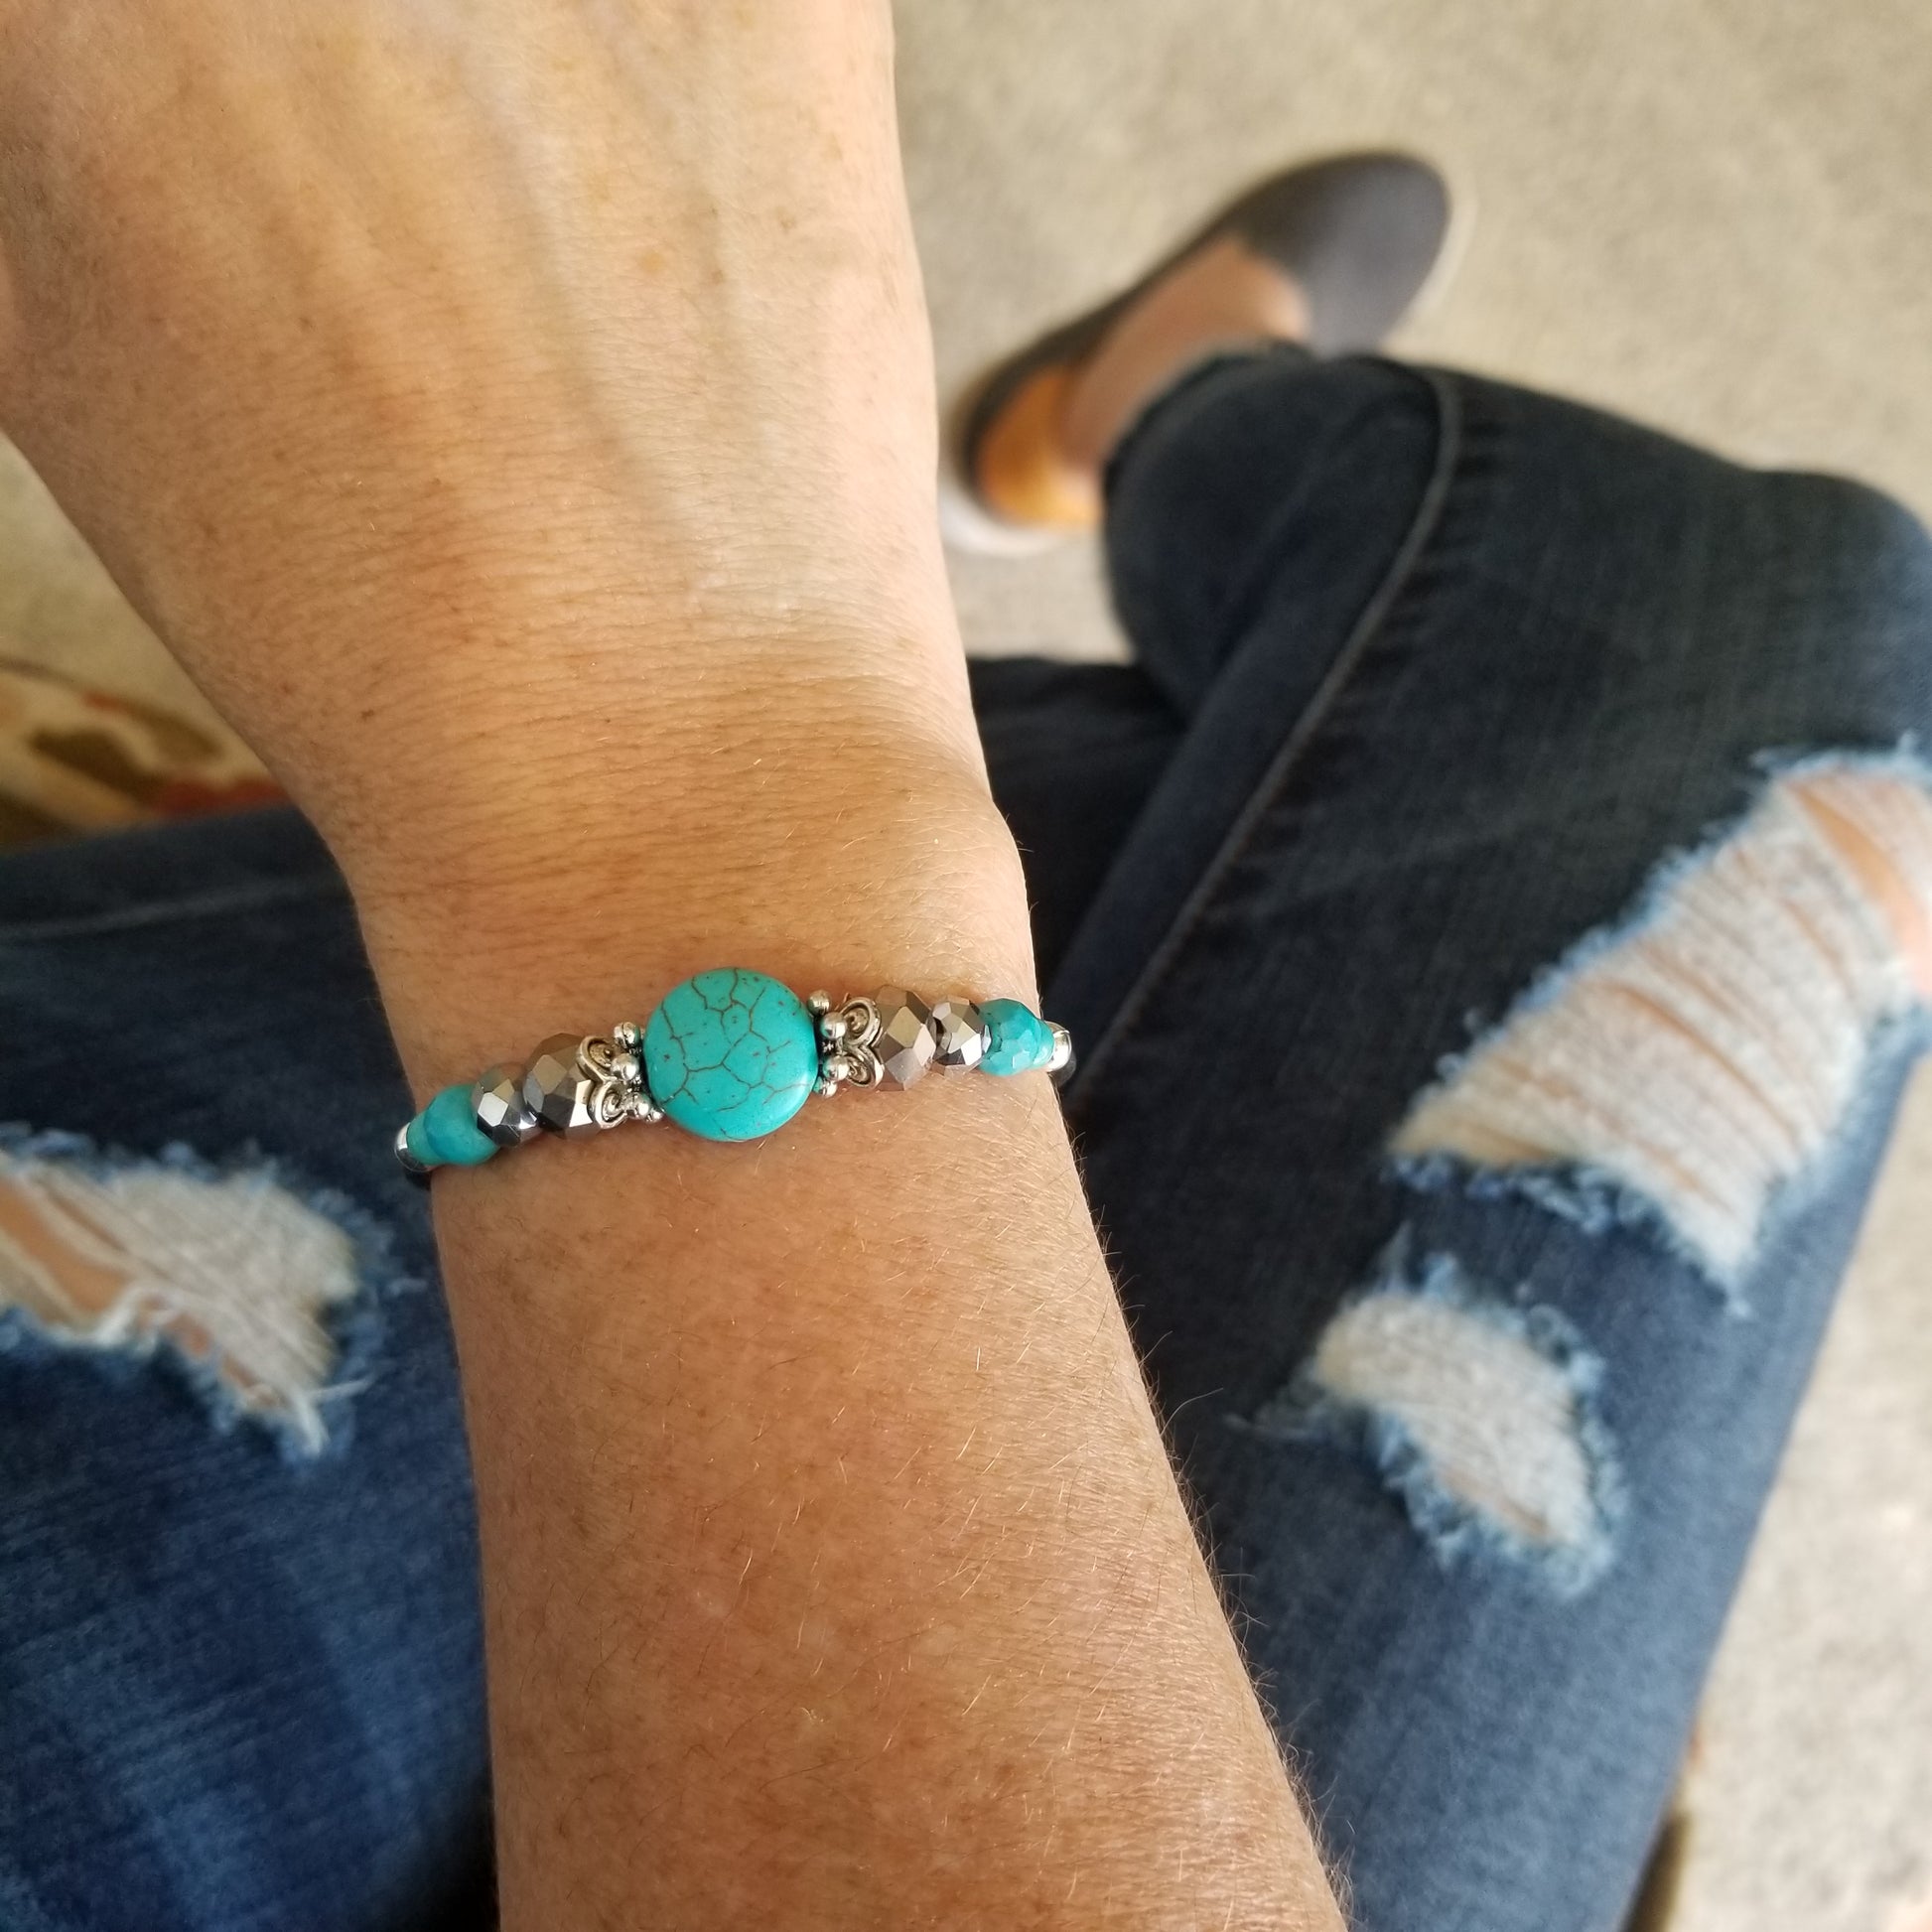 Turquoise and glass beads wrap bracelet on wrist